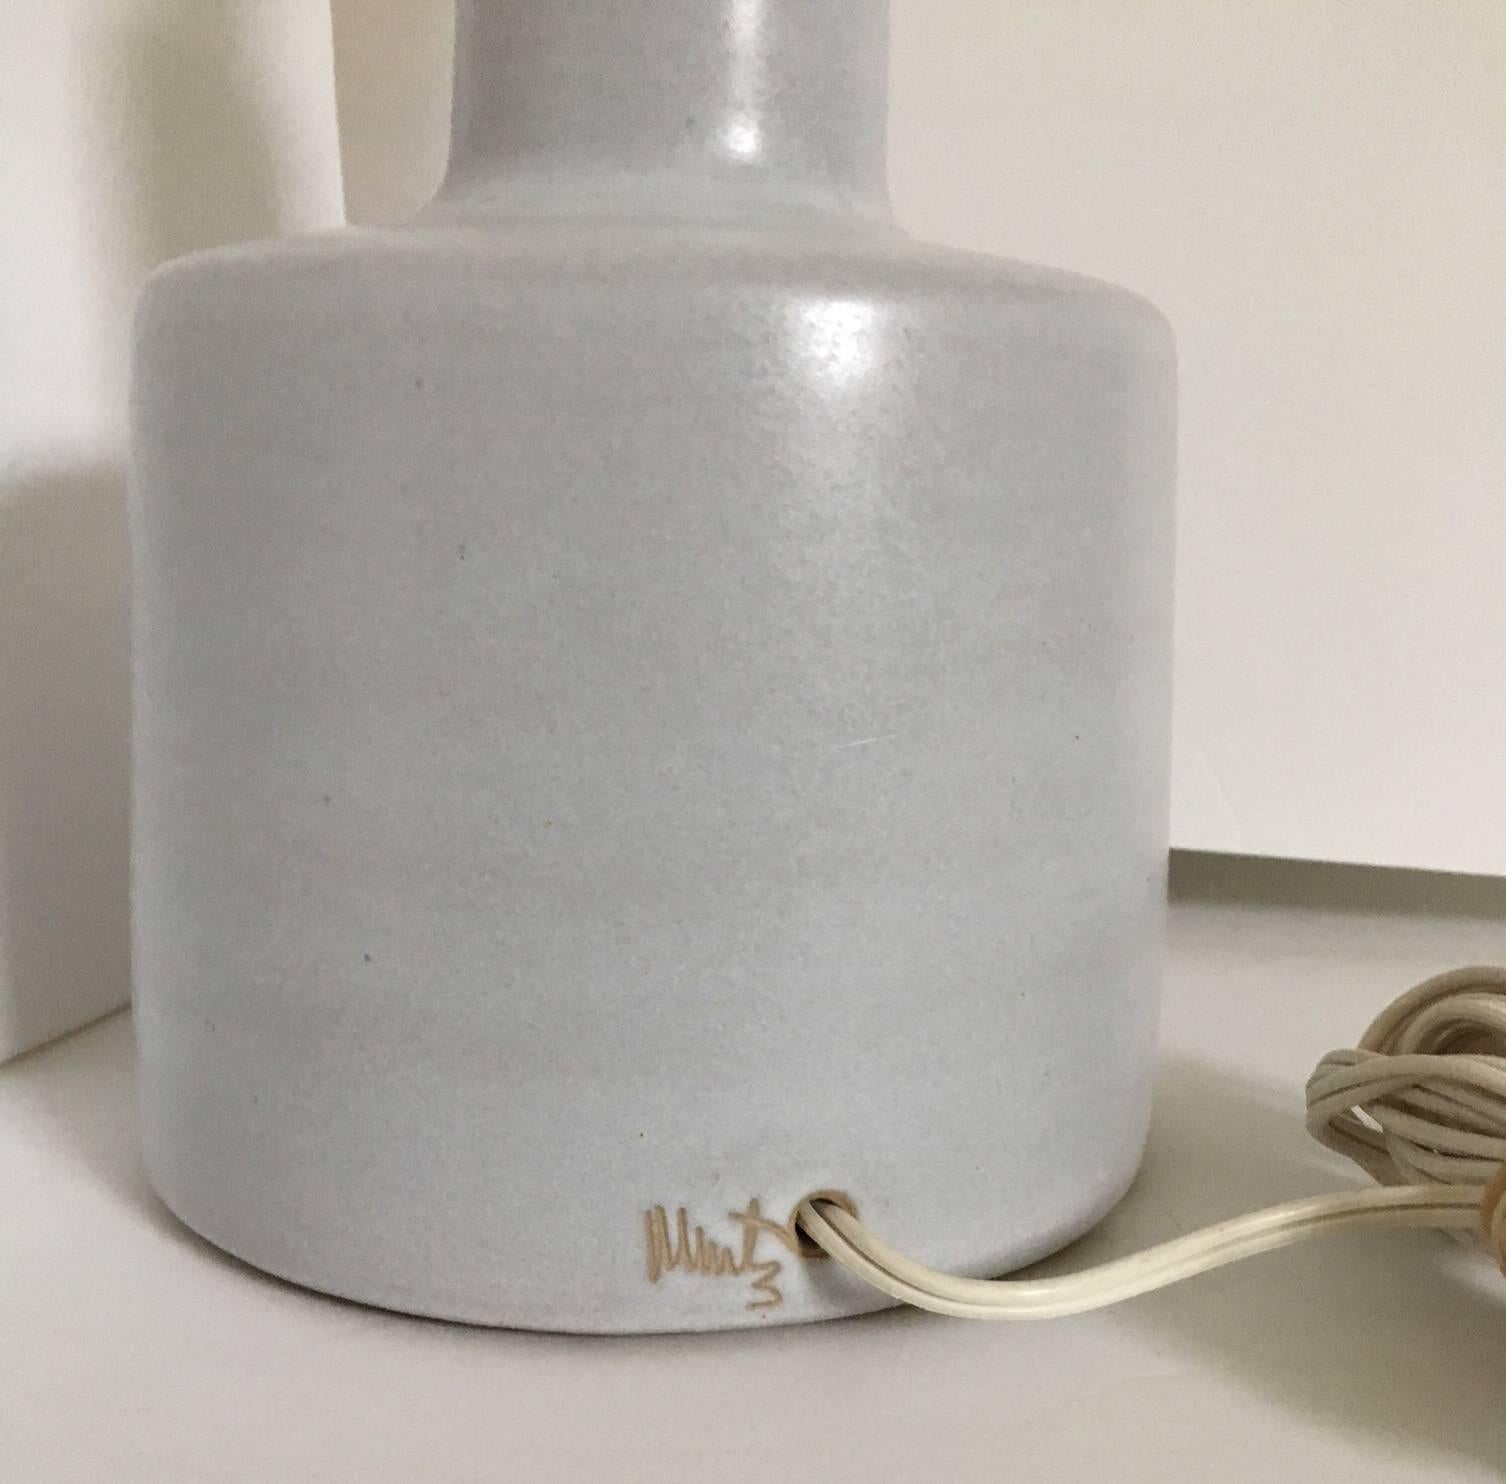 Organic studio pottery lamp by the famed Gordon and Jane Martz studio, 1960s. Wired and in working condition with original wiring and socket. Marked with the stamped Martz mark at cord opening. Lamp uses an uno ring or clip-on shade; not included.